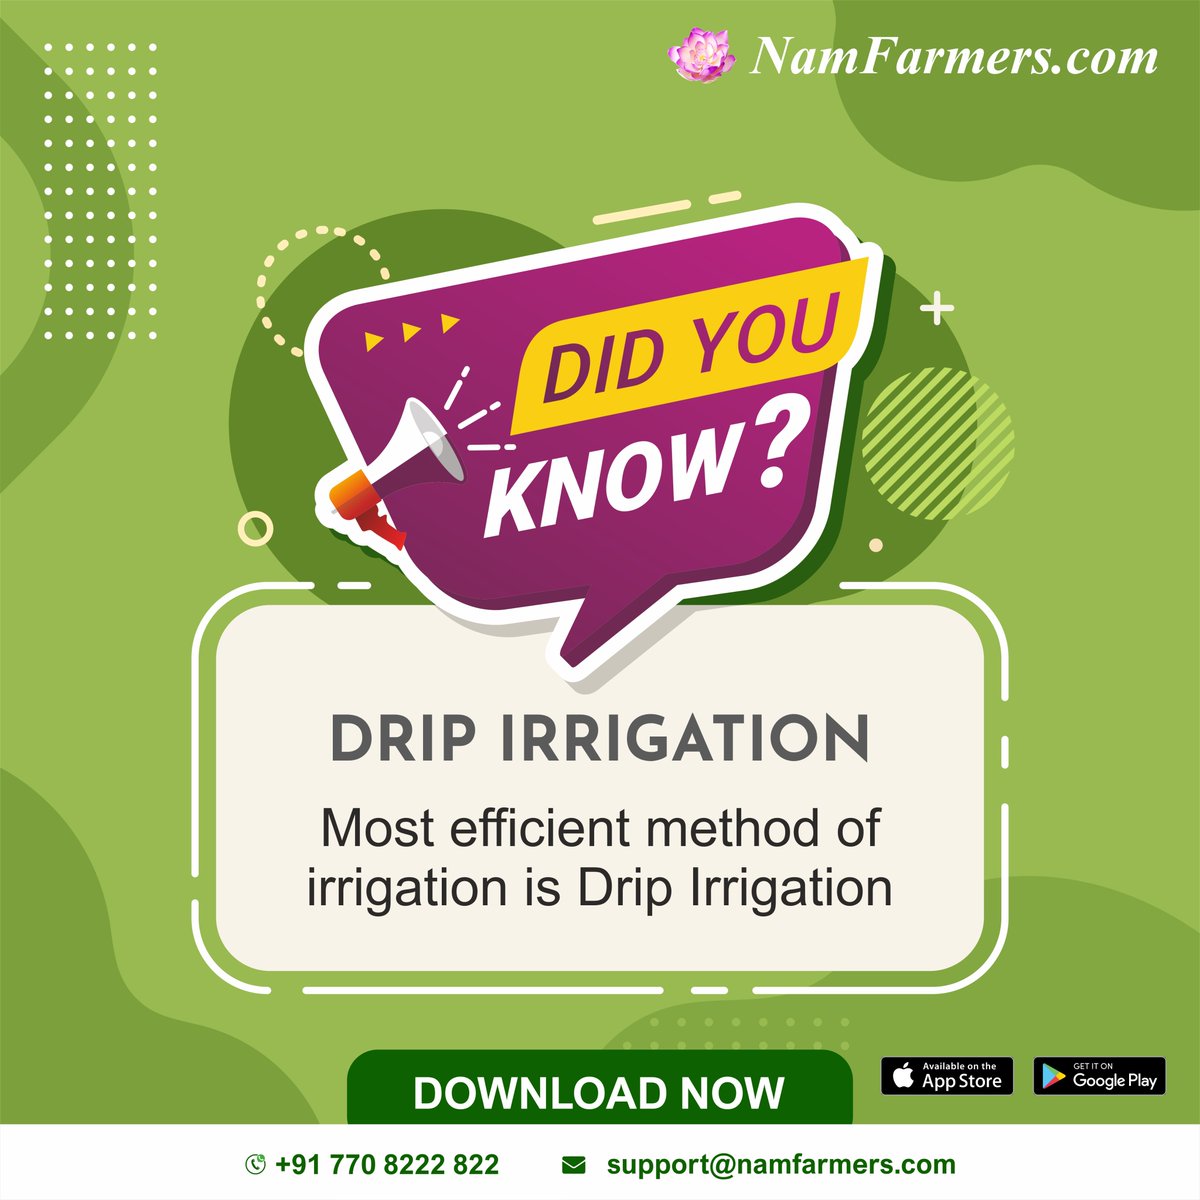 Most efficient method of irrigation is #Drip #Irrigation

Download Now:
app.namfarmers.com

#agriculture #agriquiz #agri #agricultureindia #didyouknow #facts #namfarmers #agriapp #farmerapp  #coconut #dripirrigation #followformore #agribuisness #followchallenge